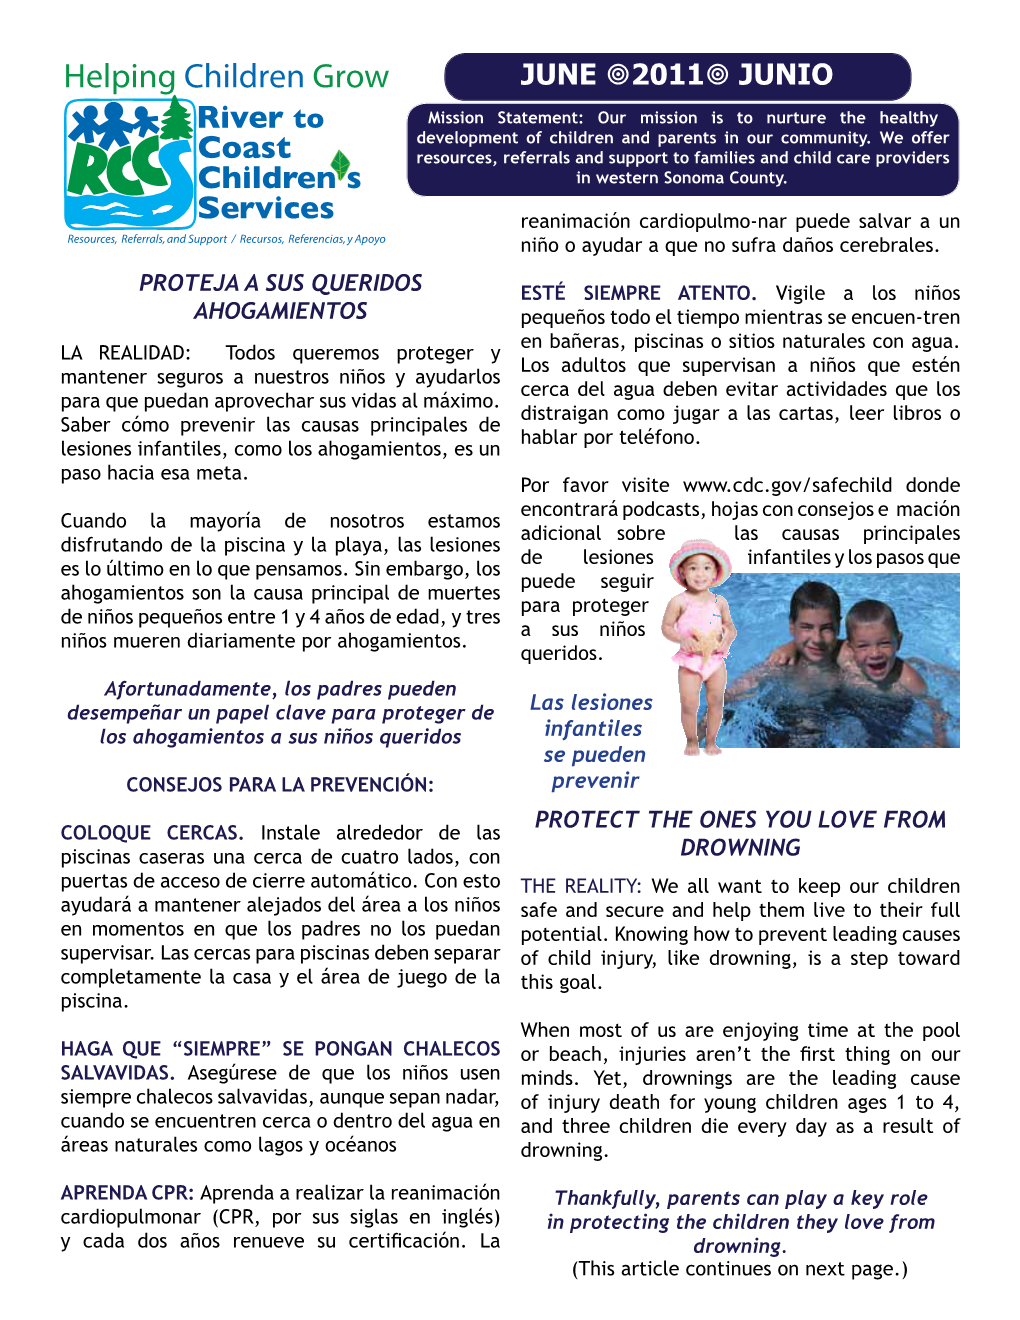 Helping Children Grow June 2011 Junio Mission Statement: Our Mission Is to Nurture the Healthy Development of Children and Parents in Our Community